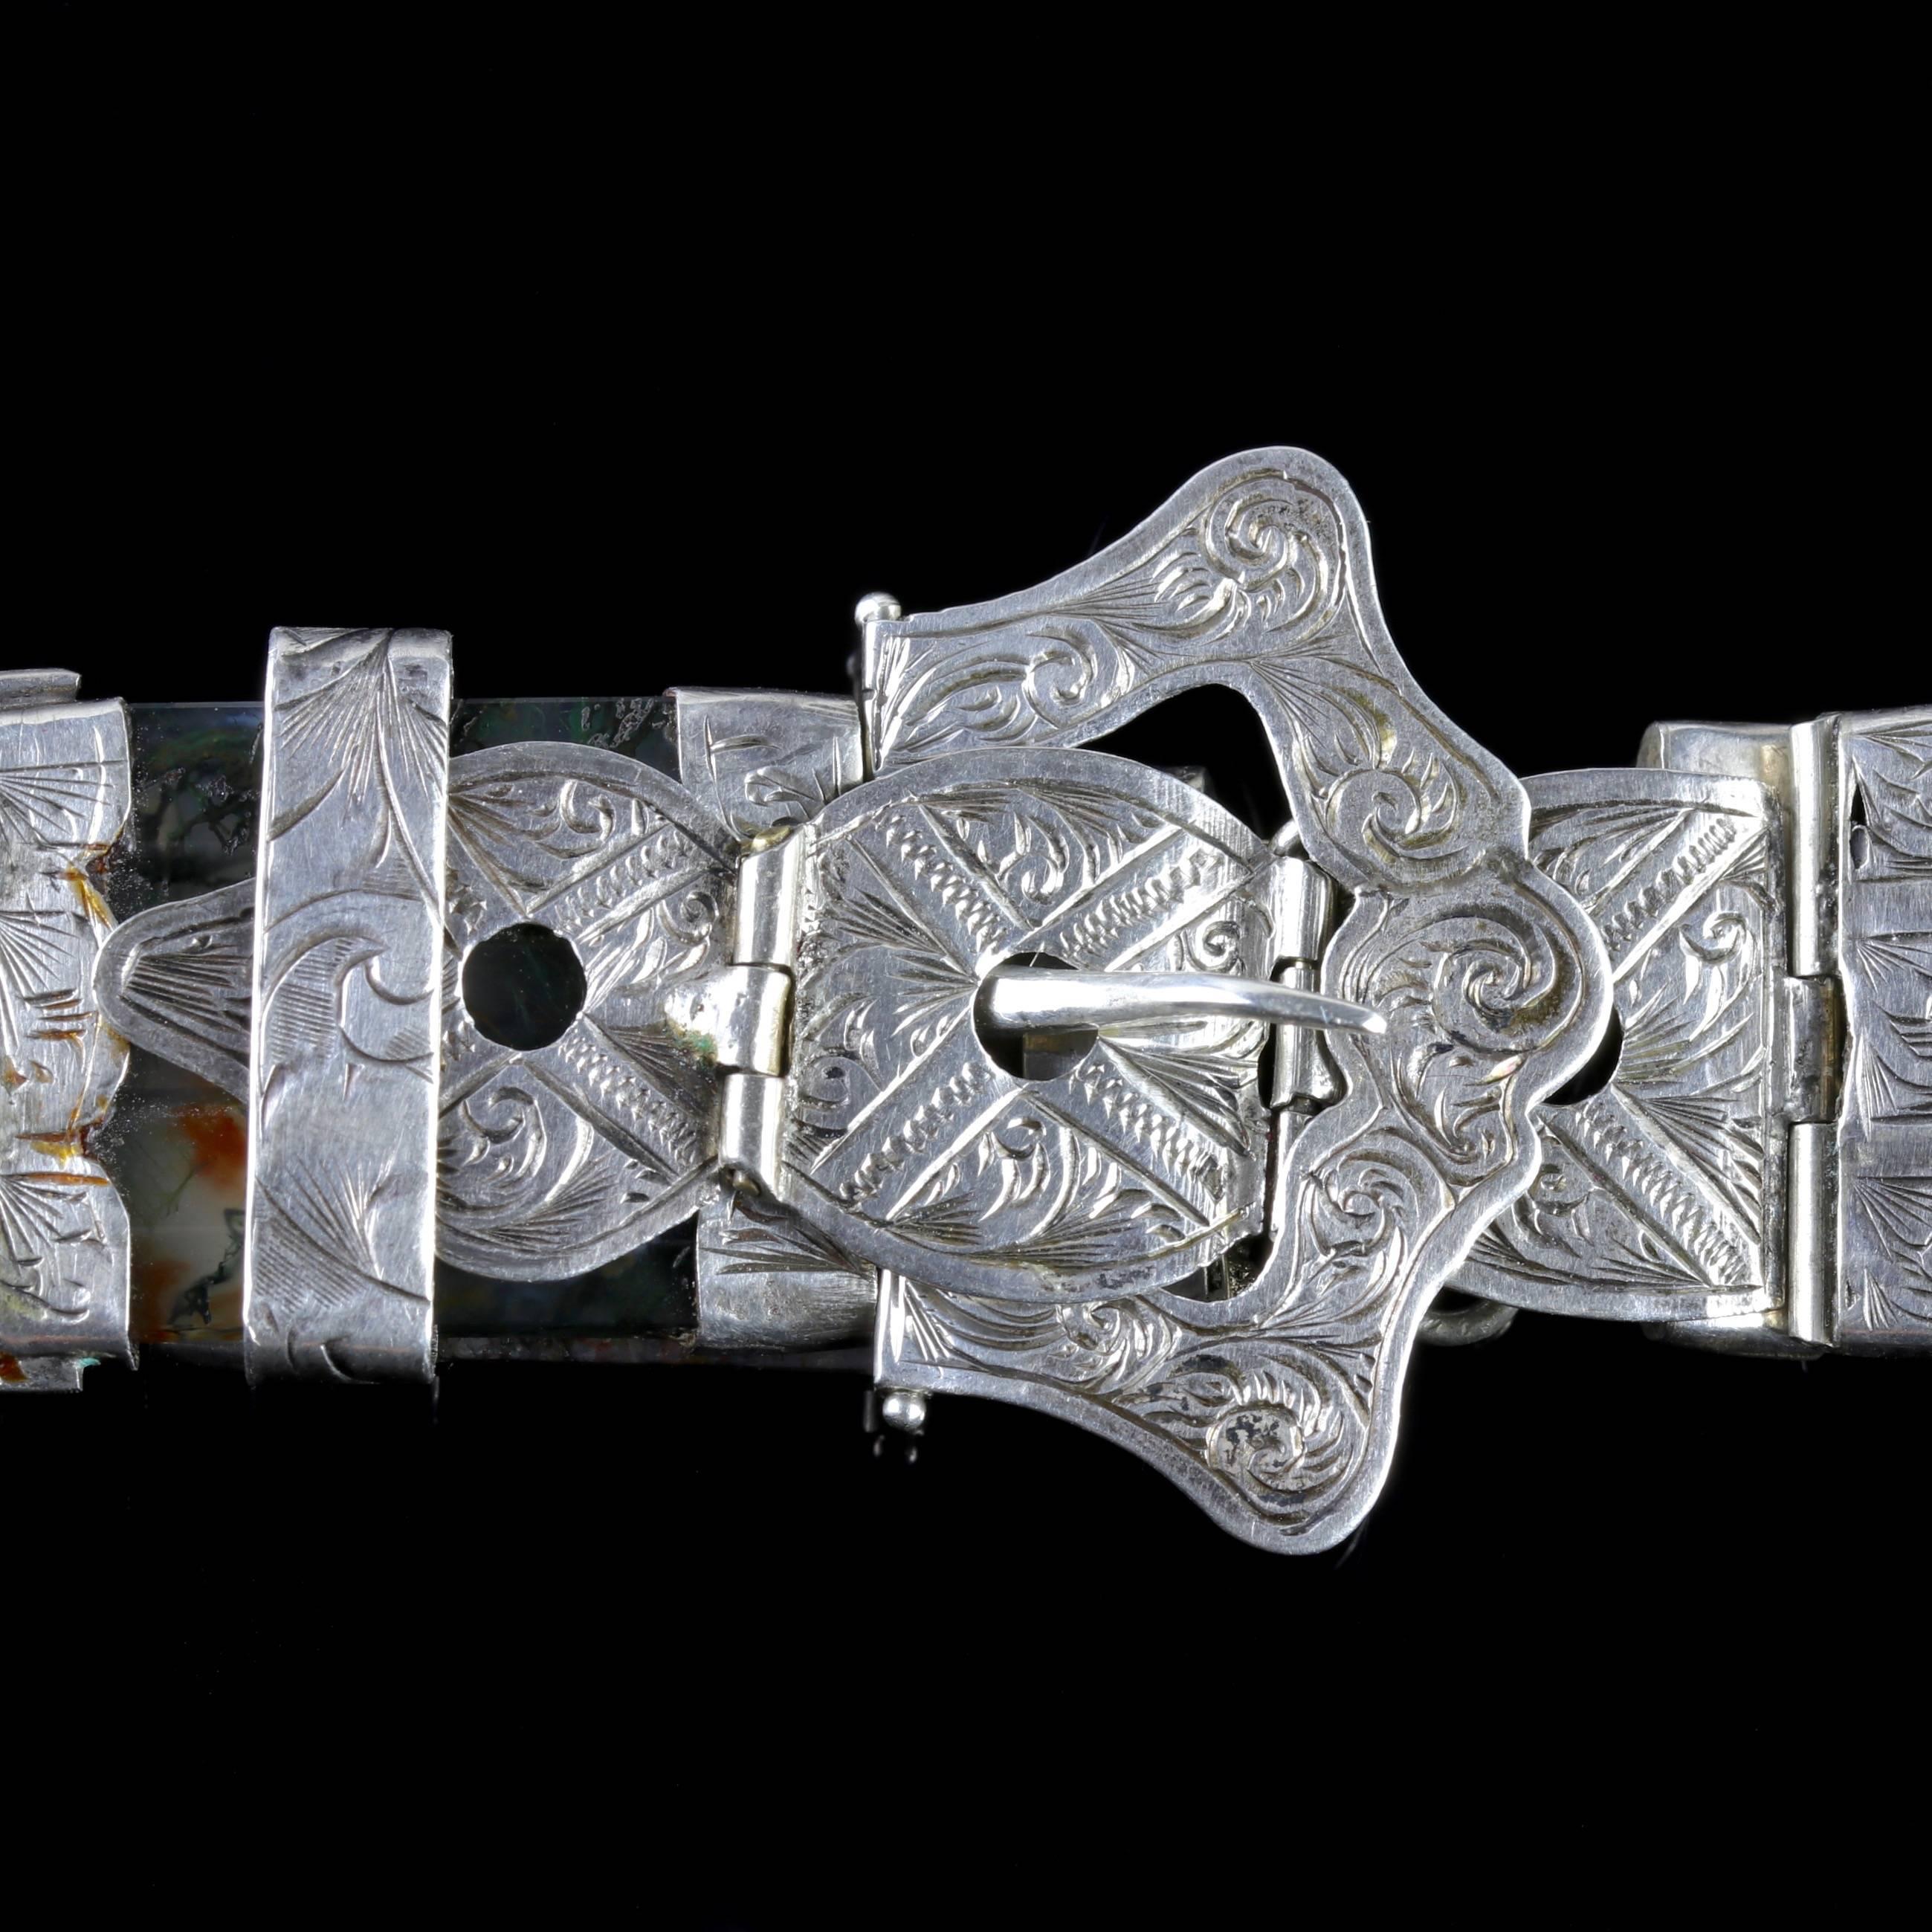 To read more please click continue reading below-

This beautiful antique Victorian Scottish Silver buckle bracelet is Circa 1860.

Scottish jewellery was made popular by Queen Victoria as it became a souvenir of her frequent trips to Scotland and